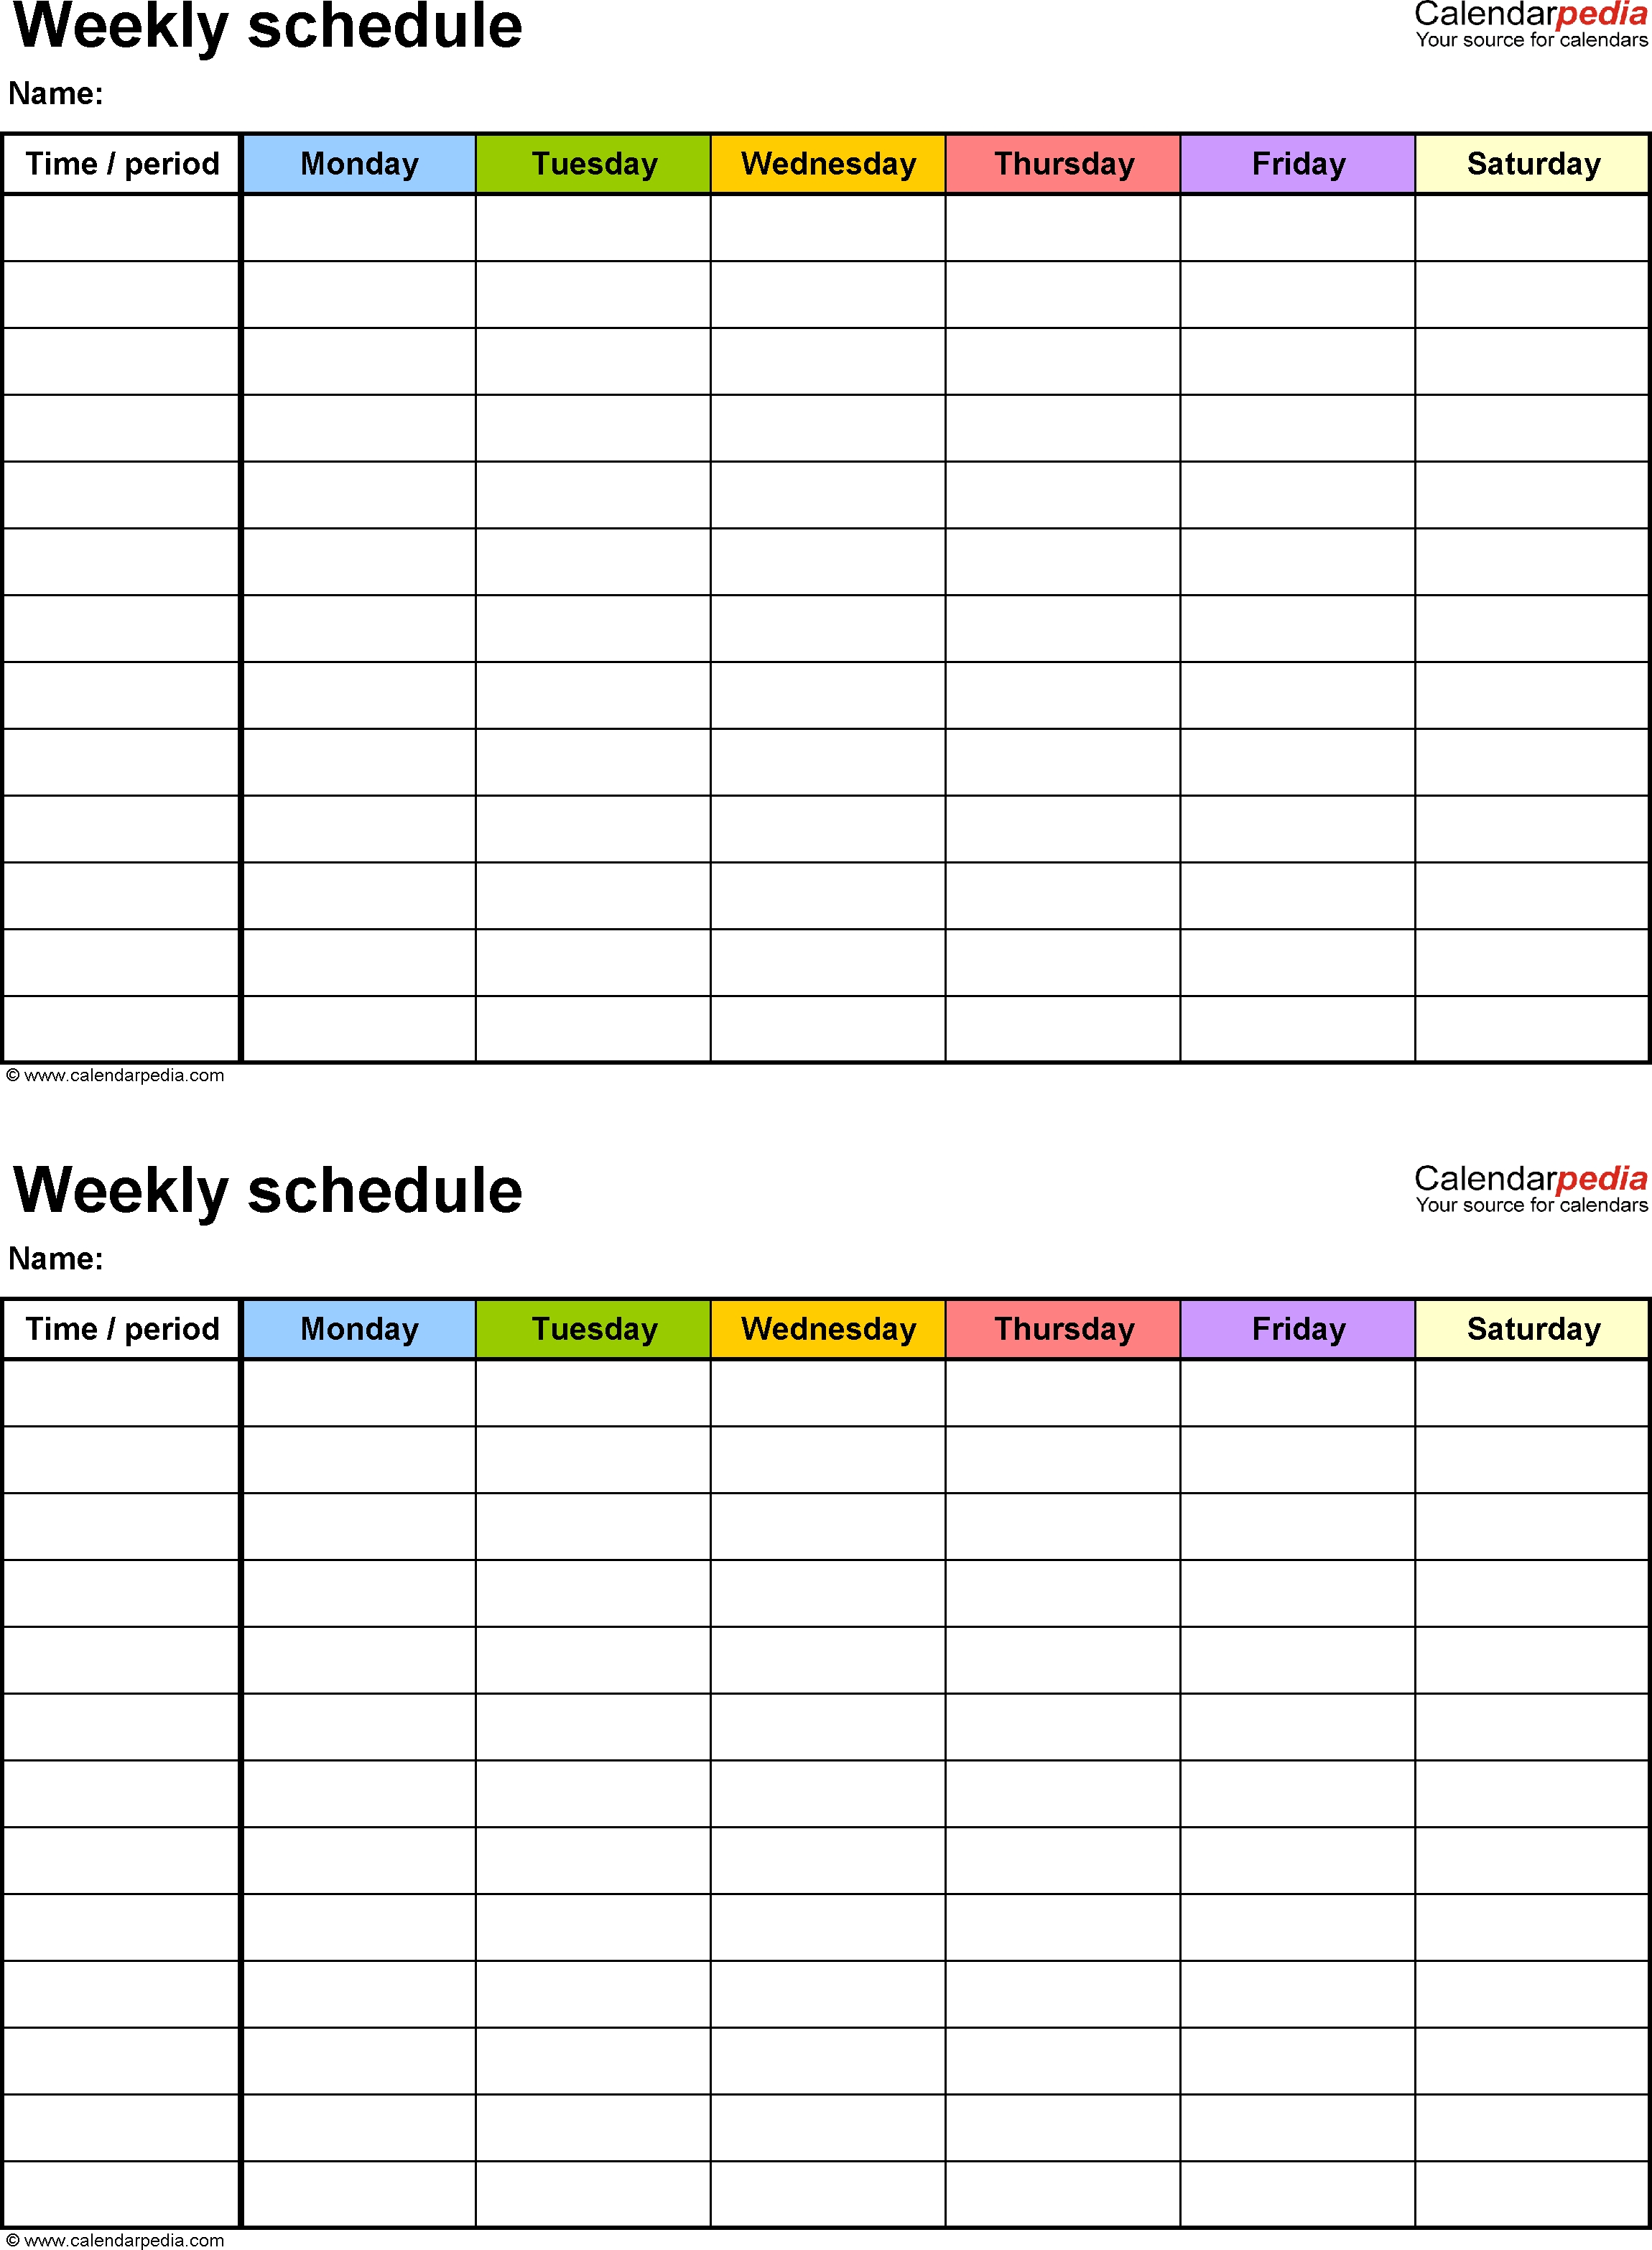 Free Weekly Schedule Templates For Excel - 18 Templates 7 Week Calendar Template